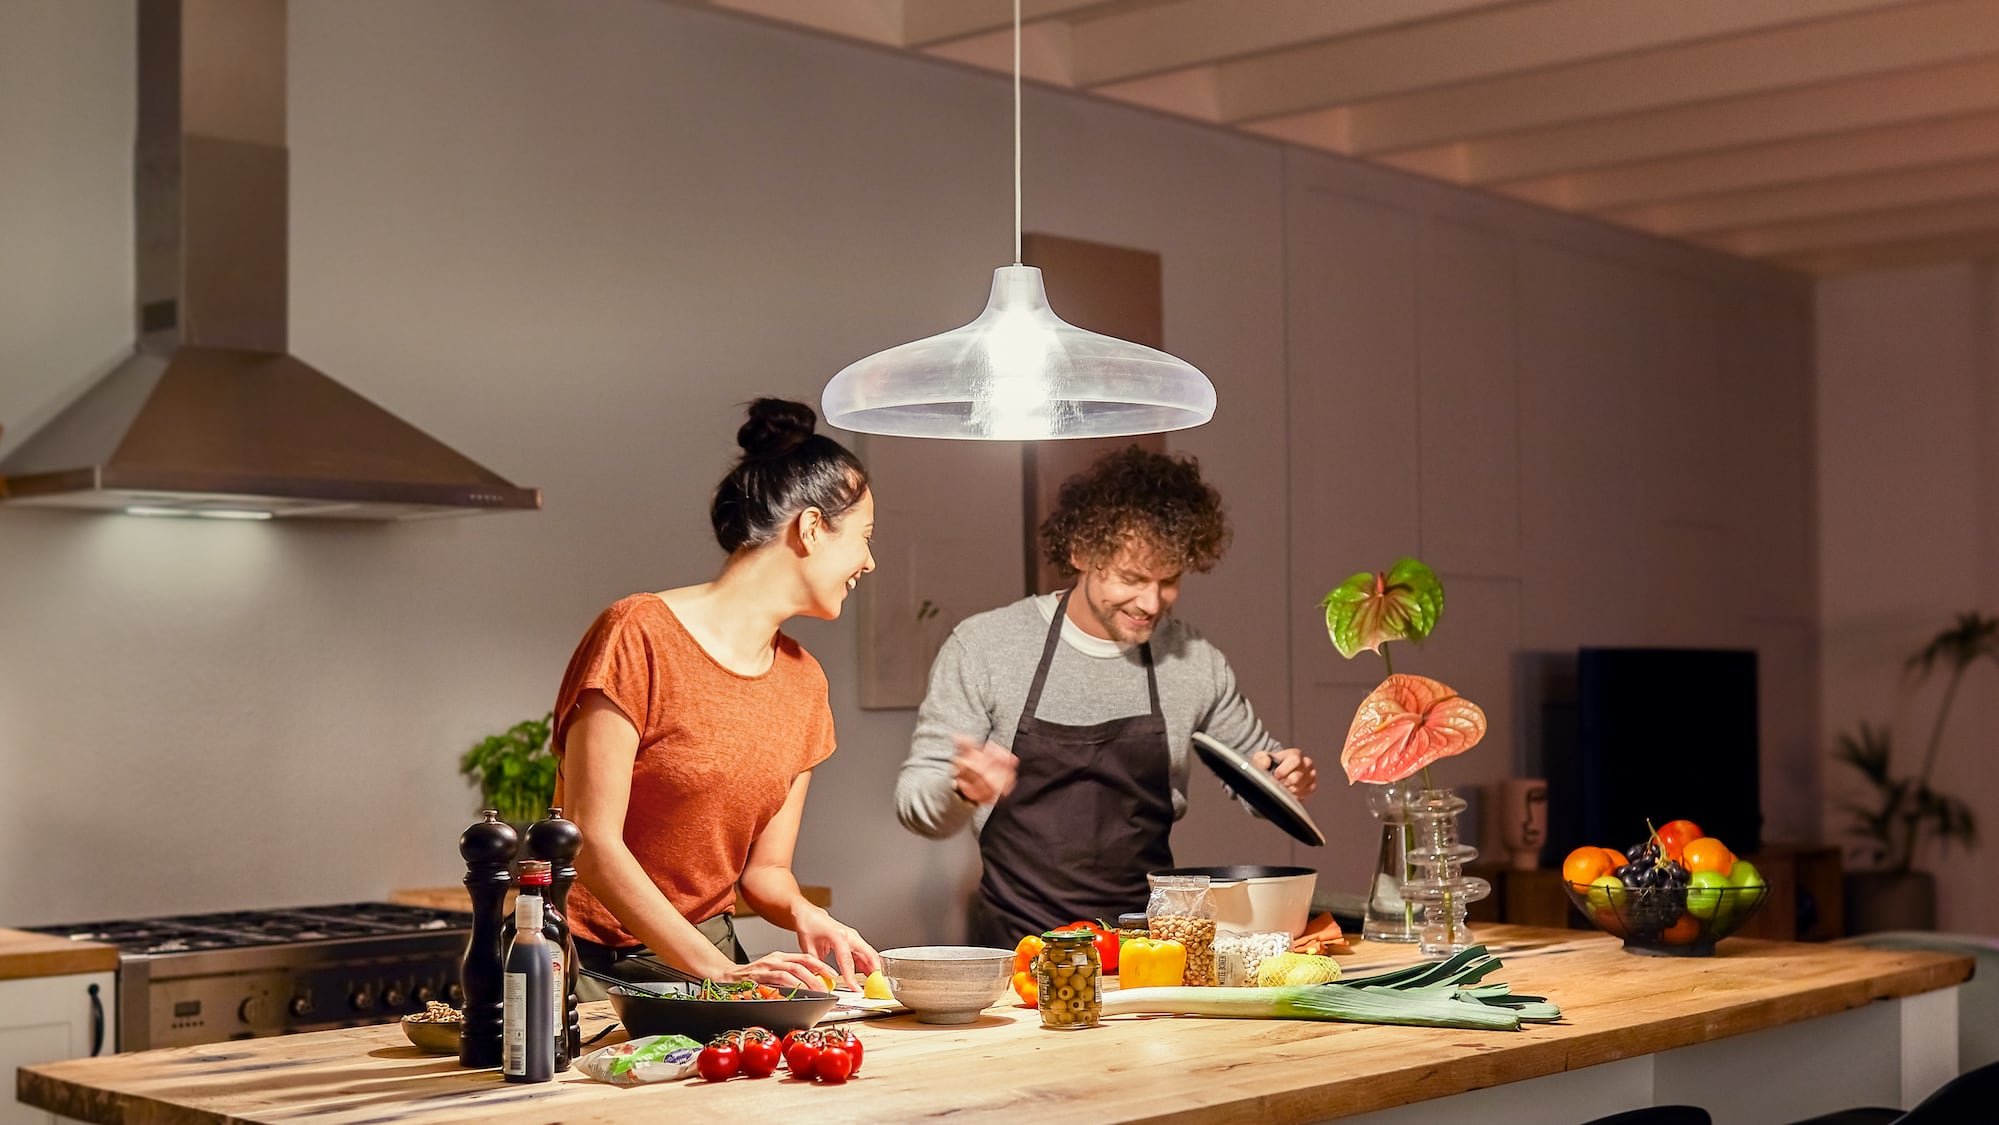 Philips Hue White A21 Smart Bulb emits up to 1600 lumens